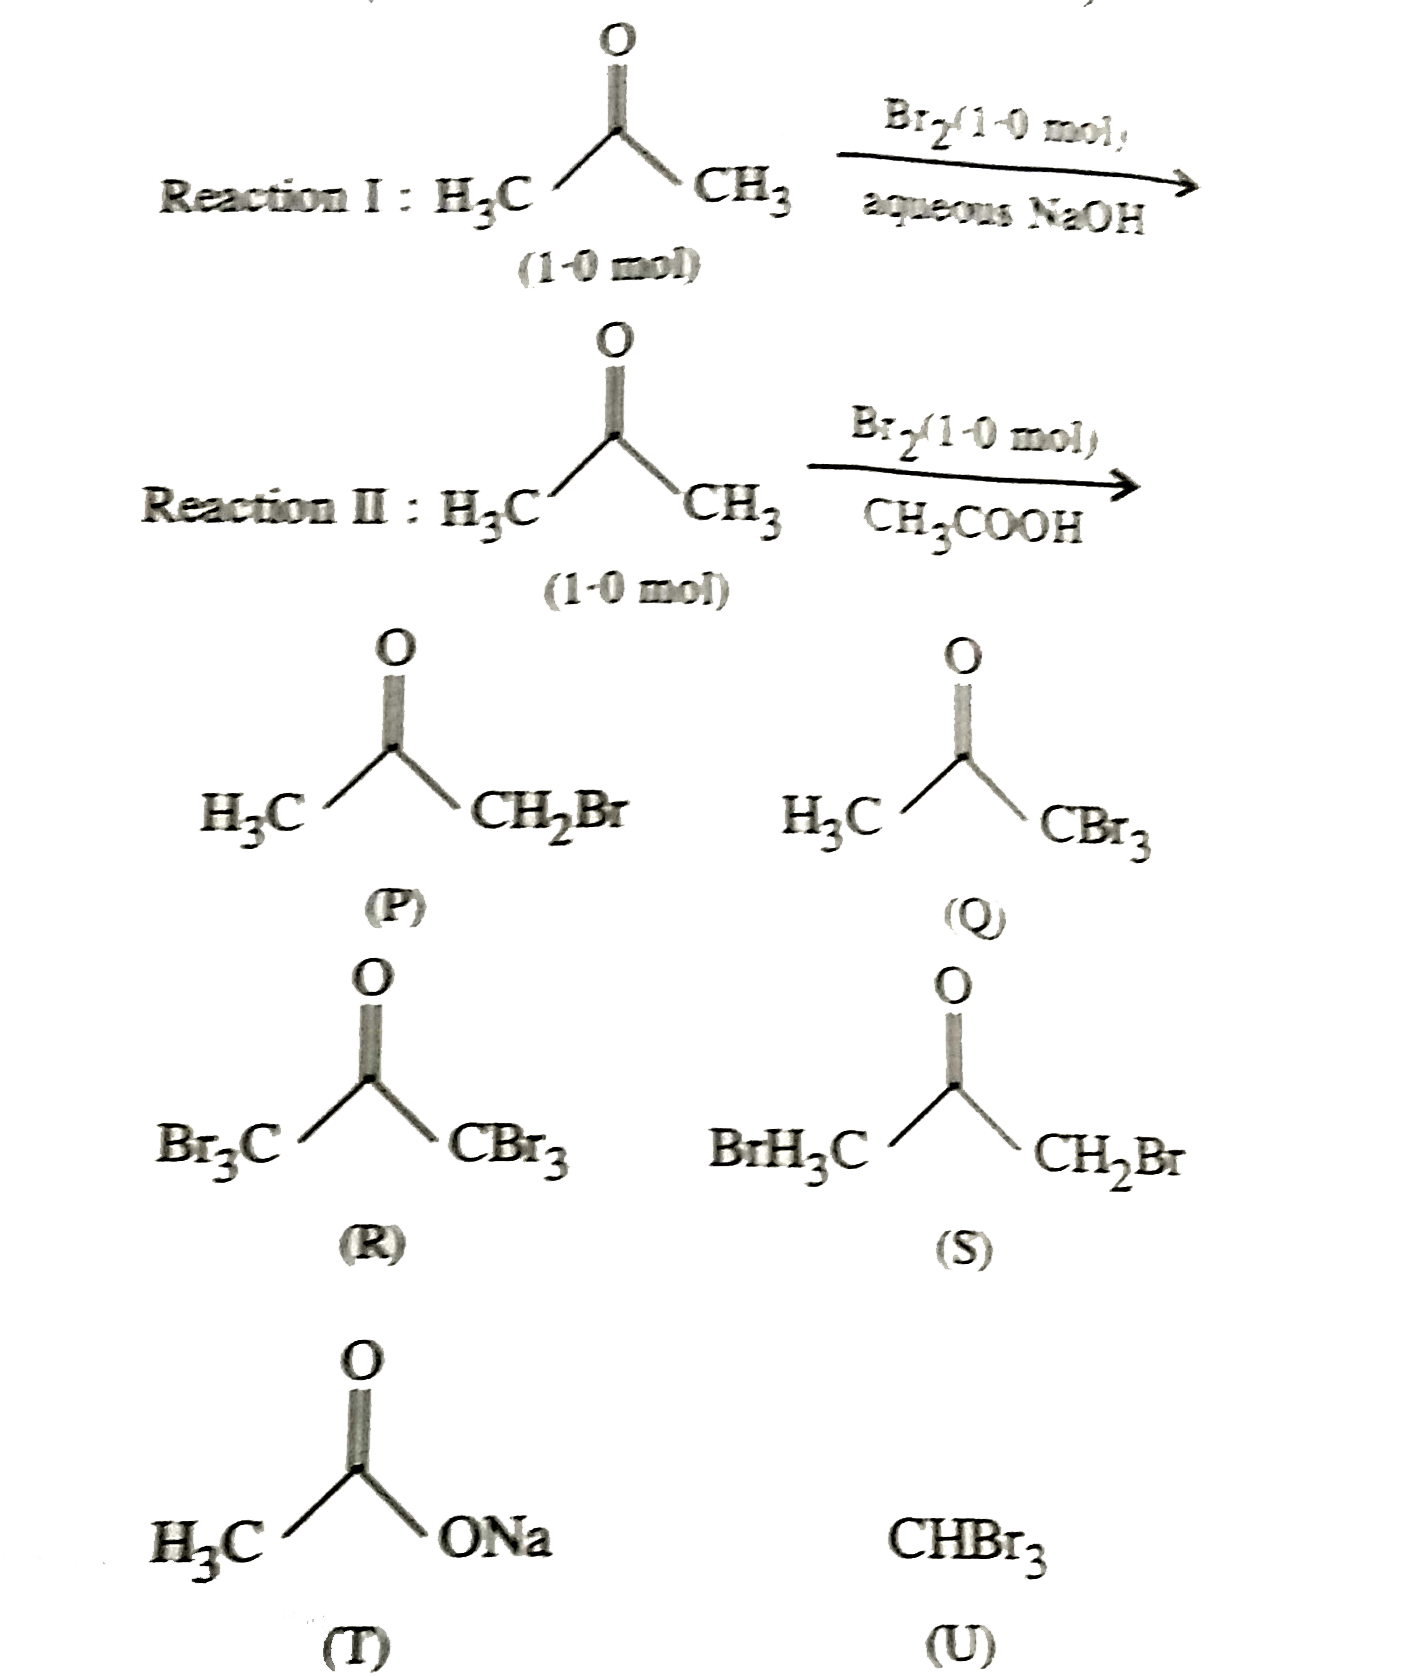 After completion of the reaction (I and II), the orgnanic compound(s) in the reaction mixtures is(are)